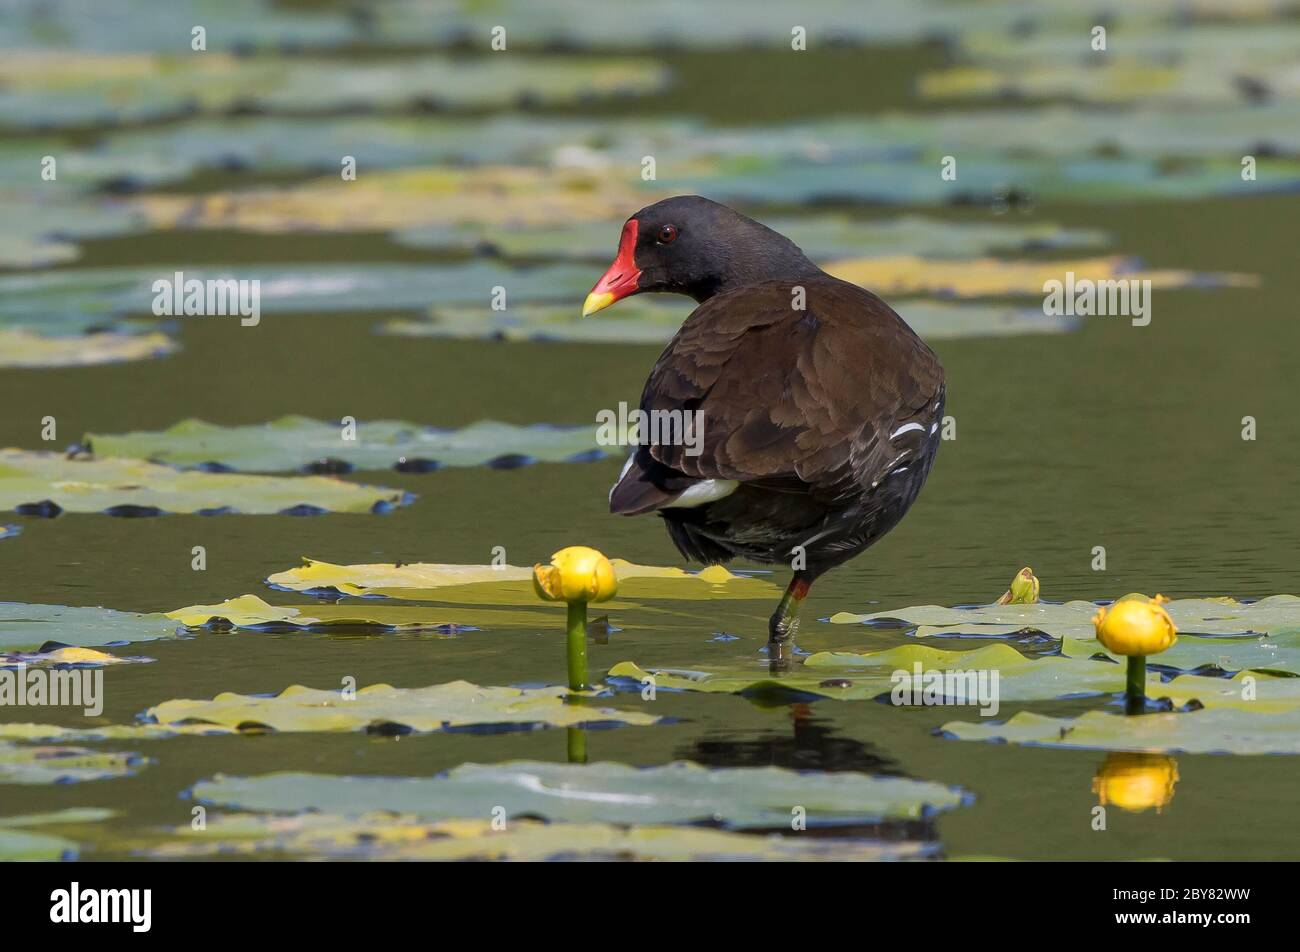 Rear view close up of wild UK moorhen (Gallinula chloropus) isolated outdoors standing on one leg in summer lily pond. Stock Photo